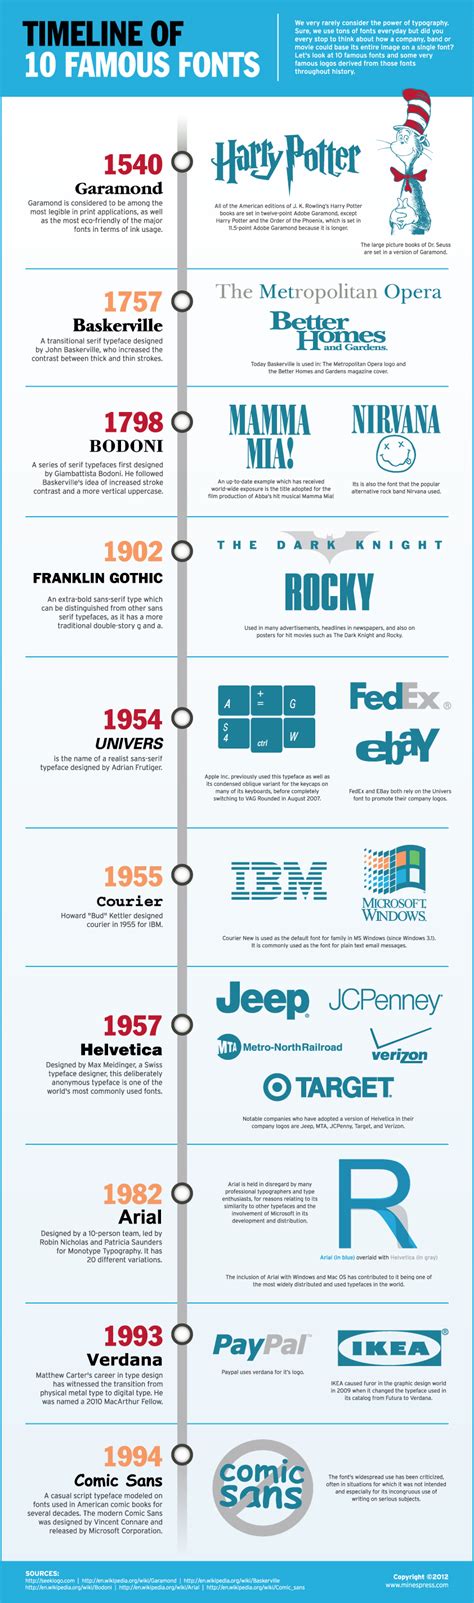 Timeline Of 10 Famous Fonts Visually